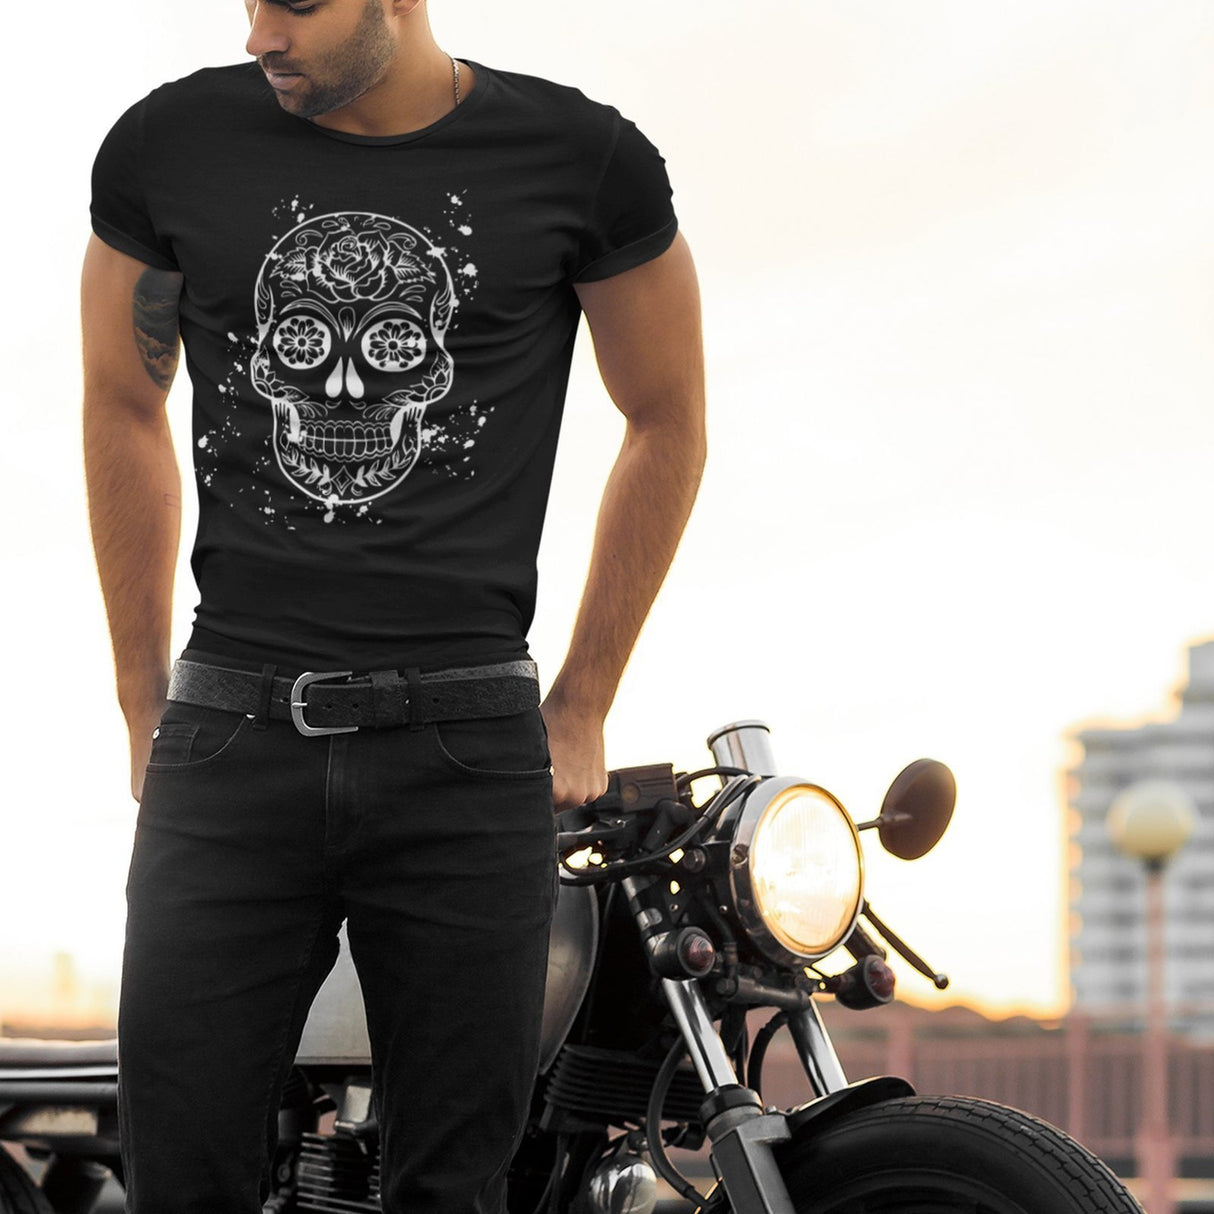 psychedelic-skull-black-and-white-skull-tee-psychedelic-t-shirt-halloween-tee-gift-t-shirt-cool-teewhite#color_black